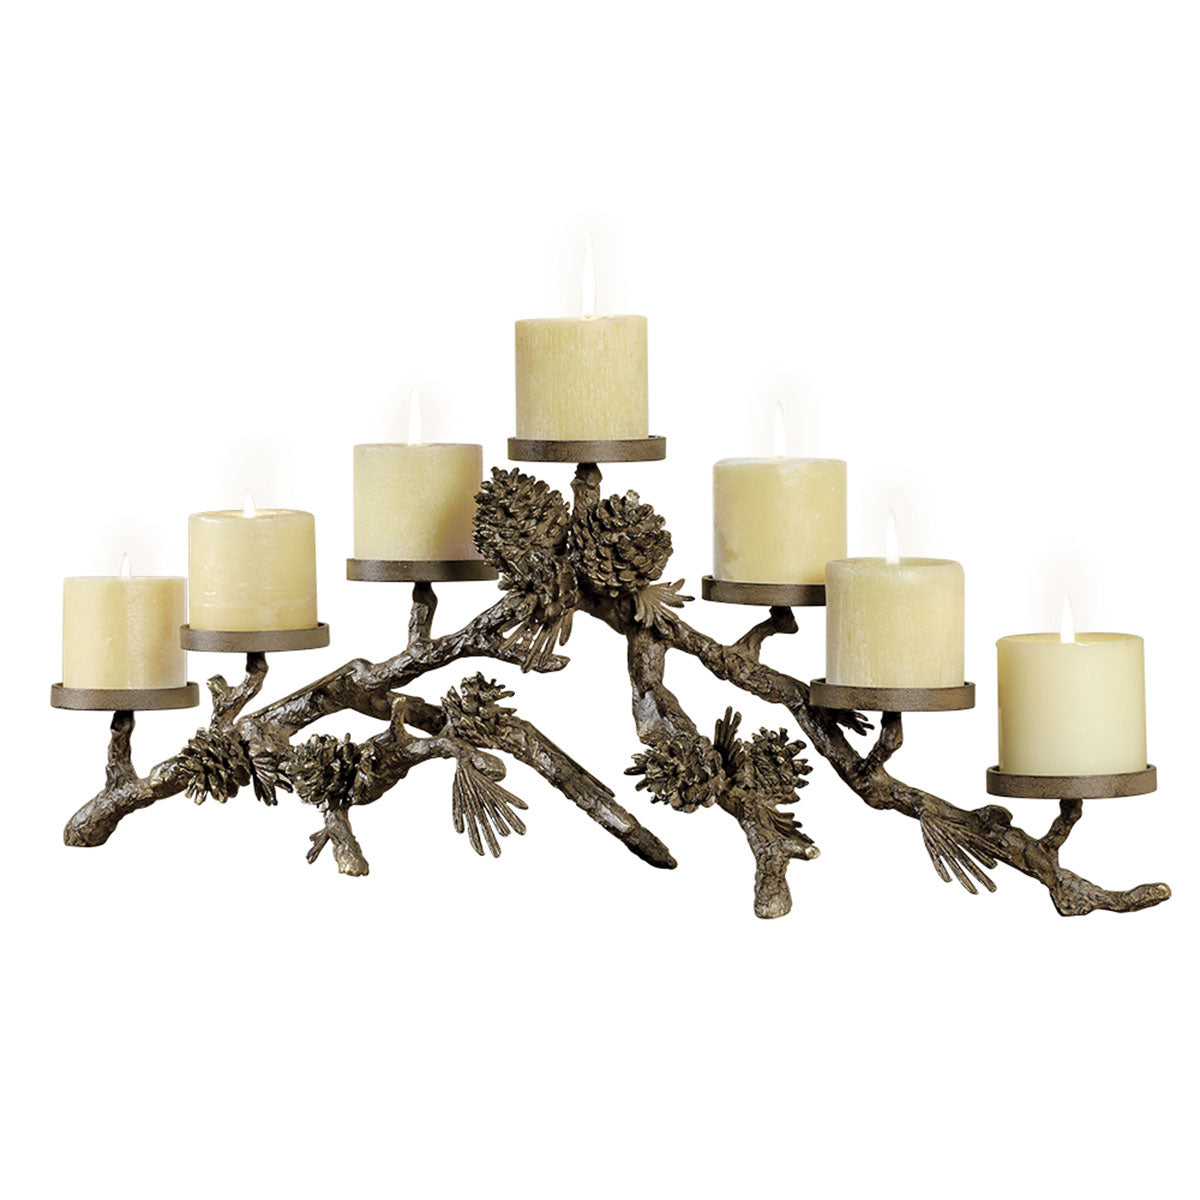 Pinecone Mantel Candle Holder - Iron Accents